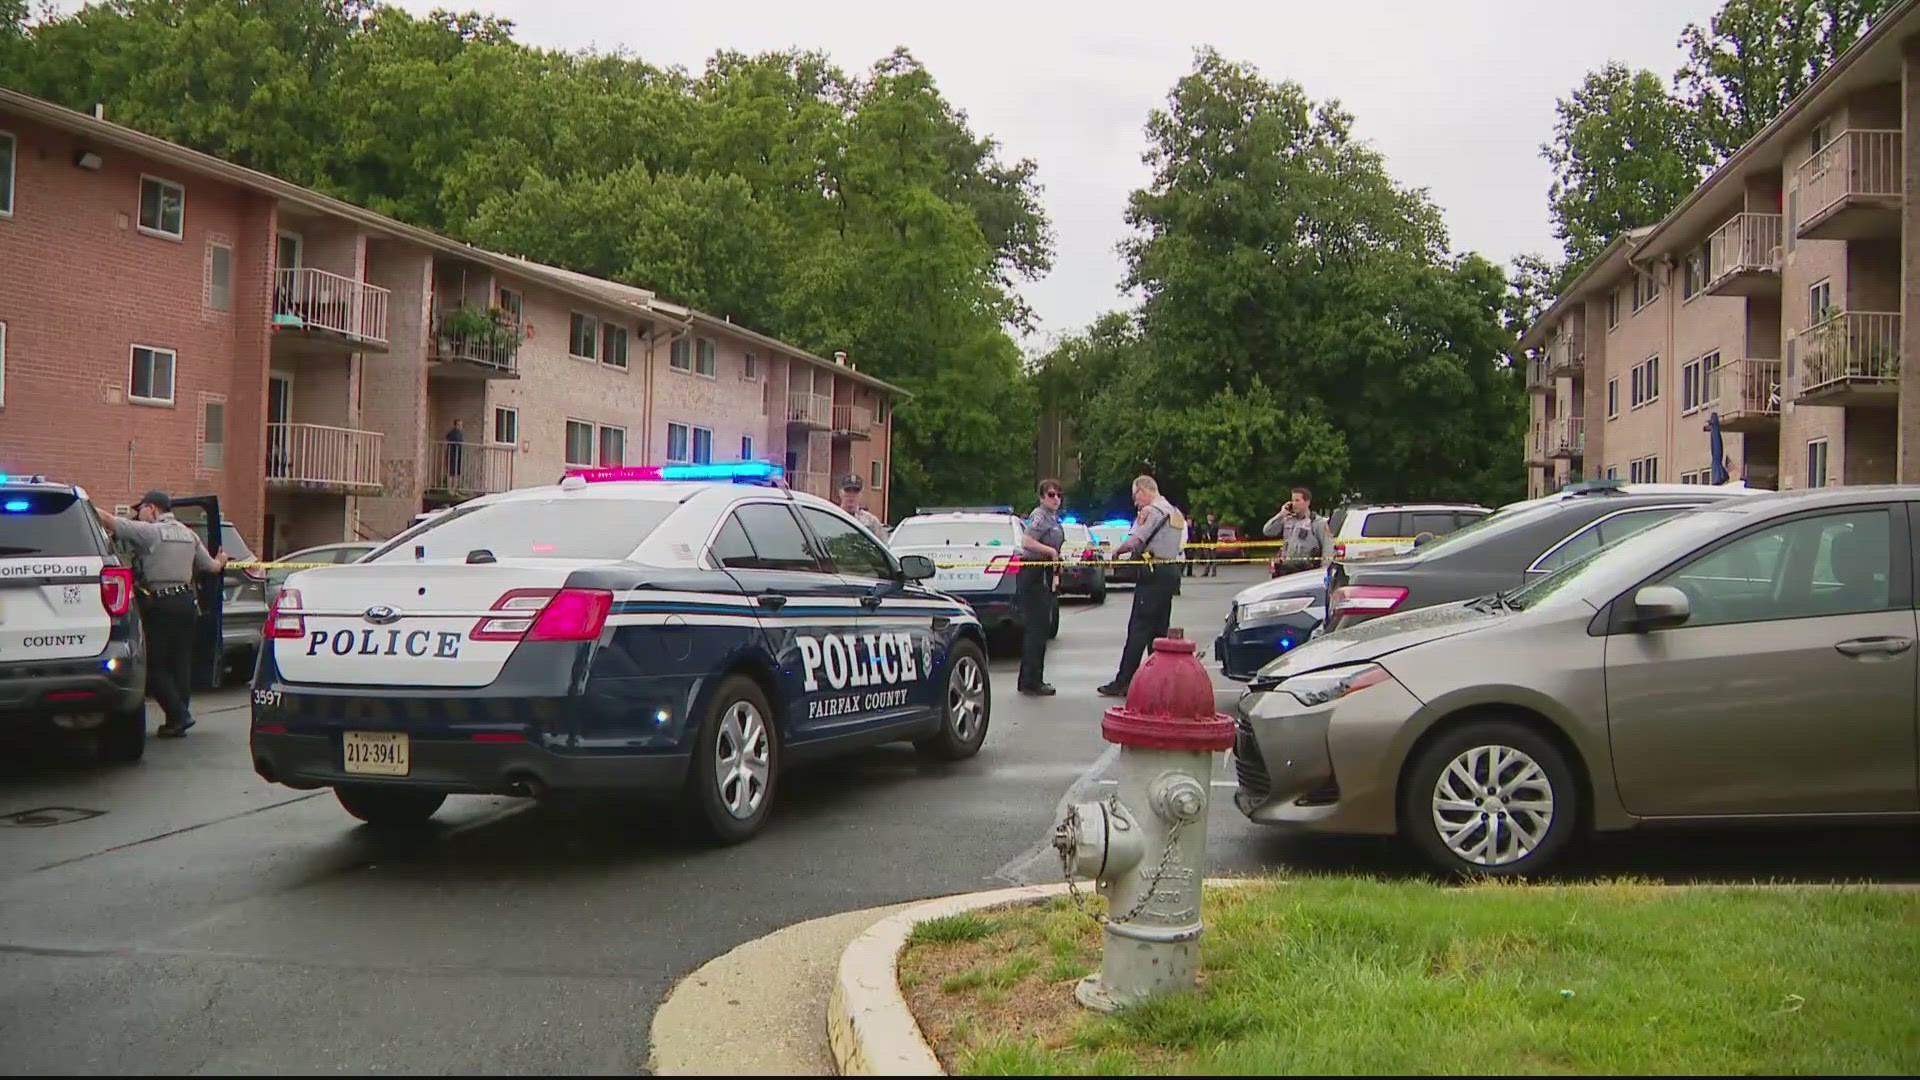 Police are investigating a deadly shooting and stabbing in Fairfax County on Monday afternoon, the Fairfax County Police Department said.